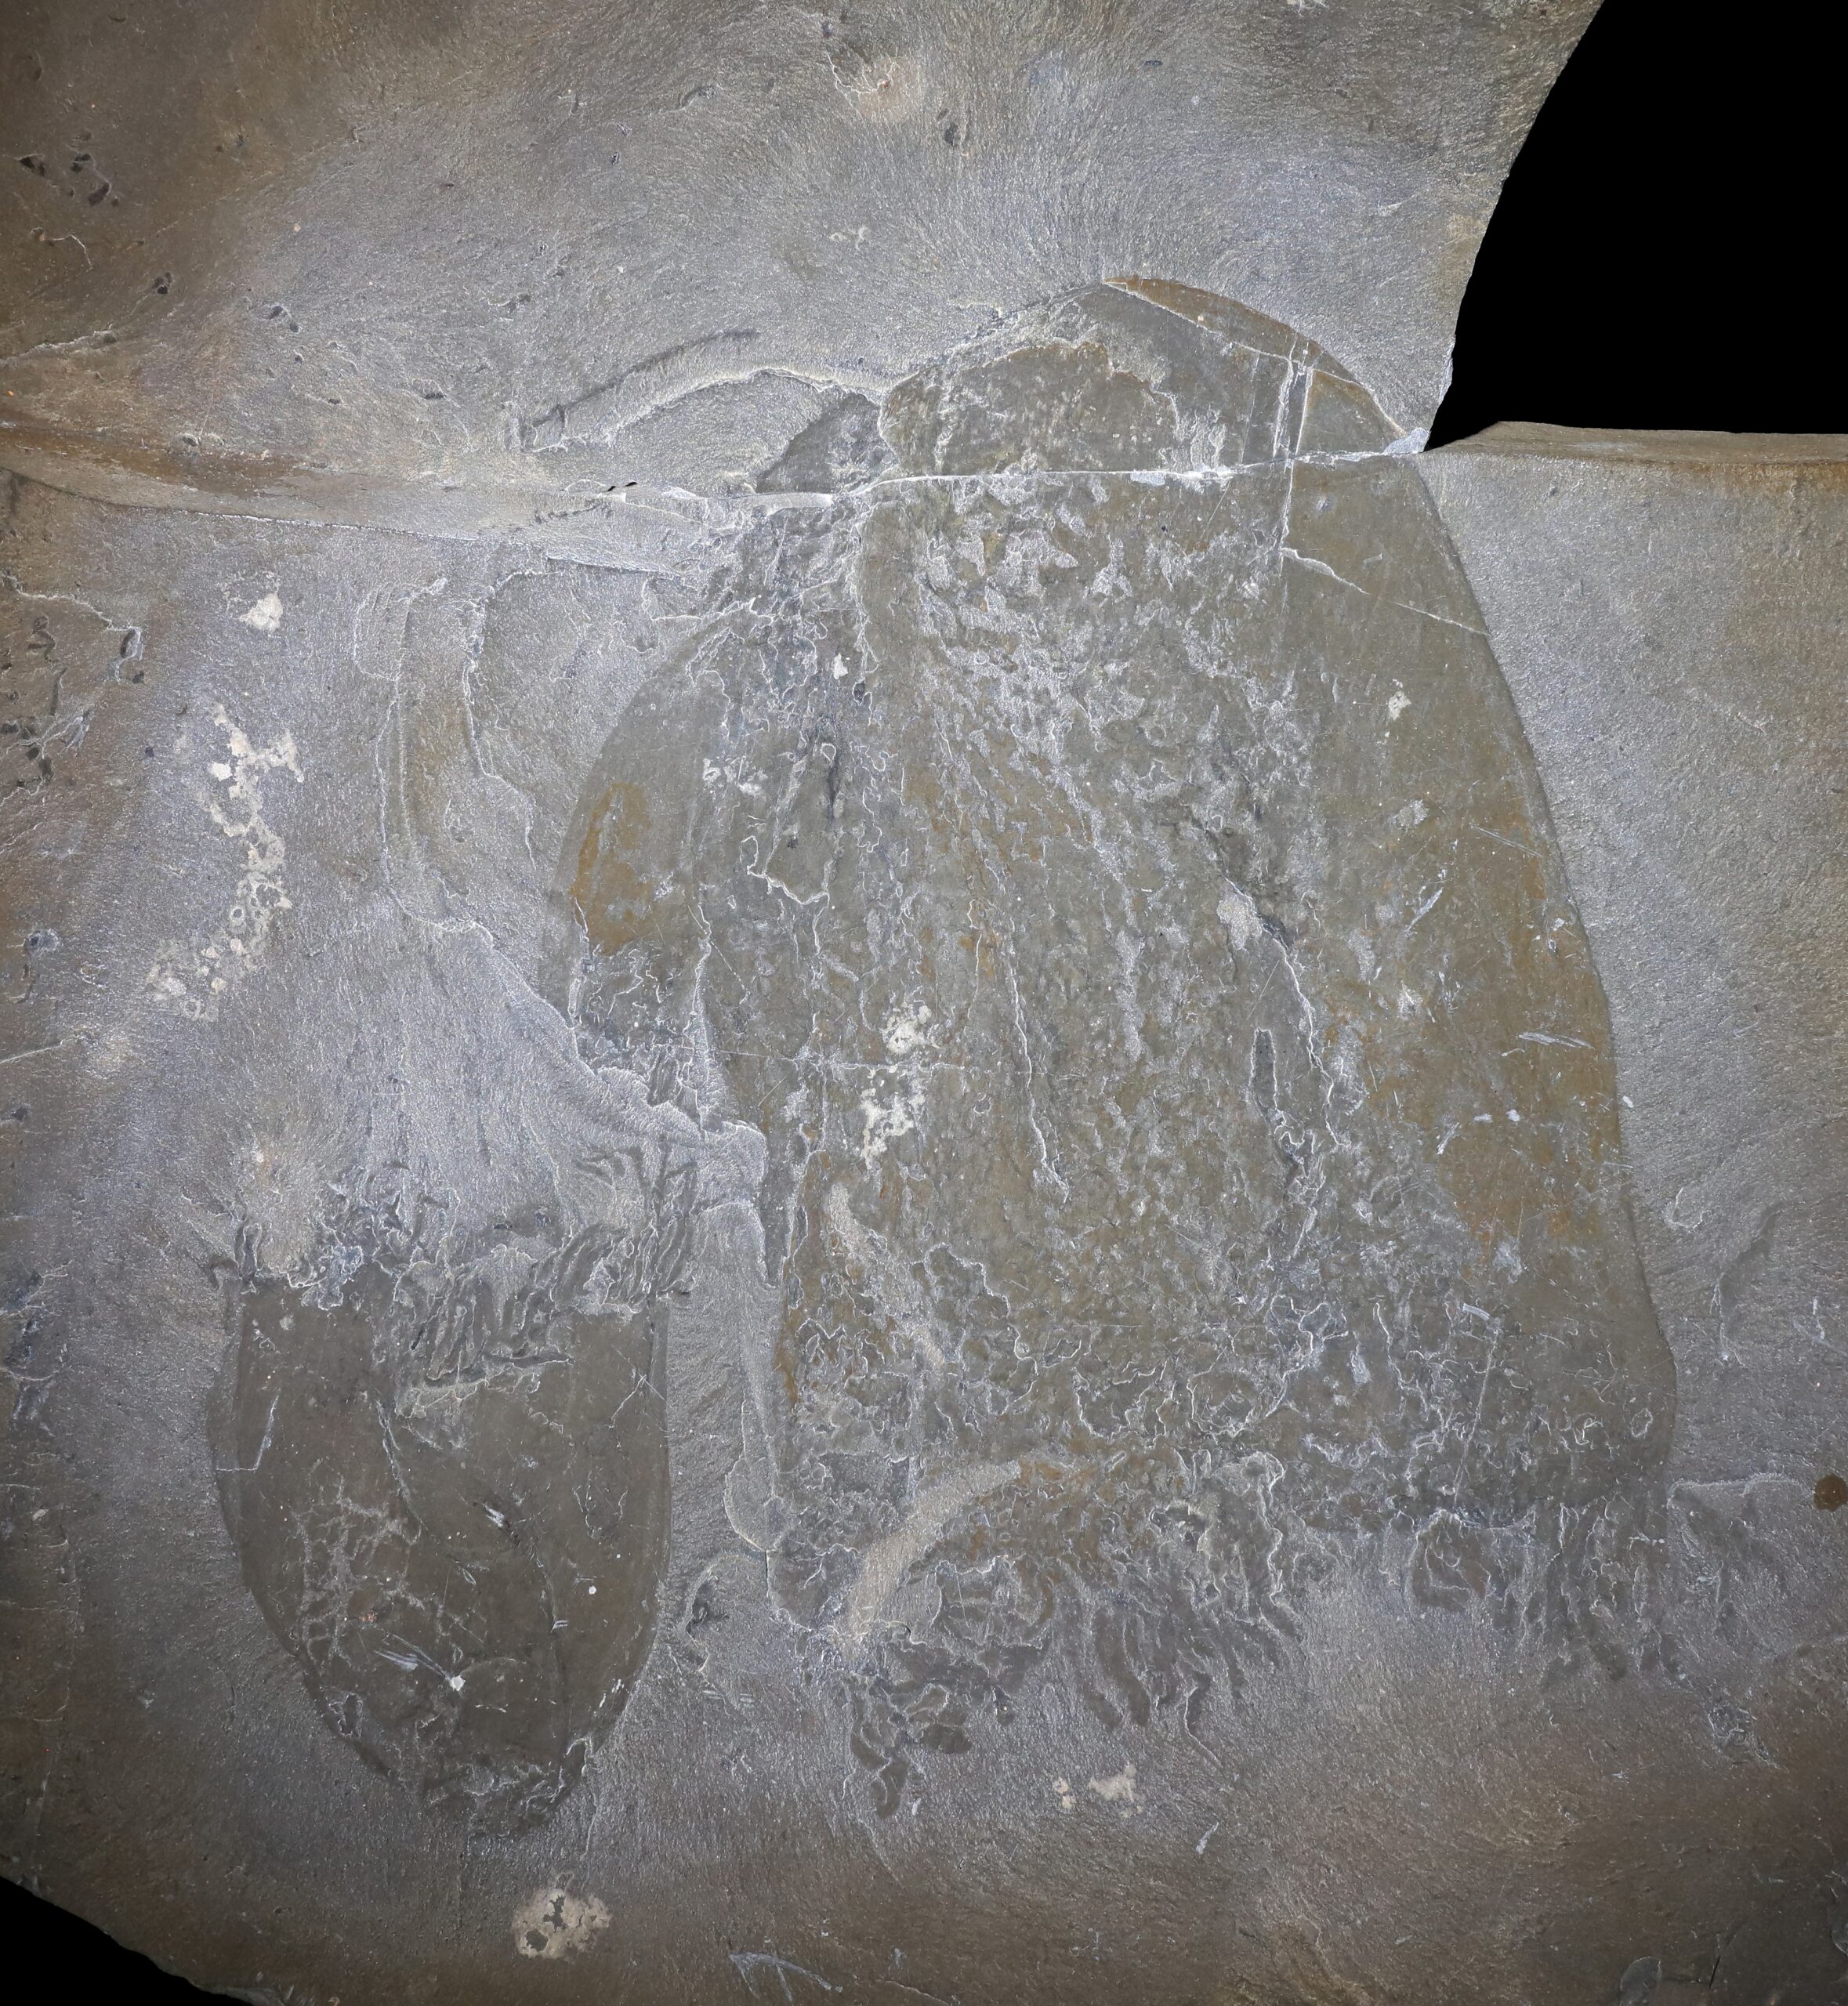 A pair of flattened jellyfish fossils with bell-shaped bodies lined with dozens of short tentacles.